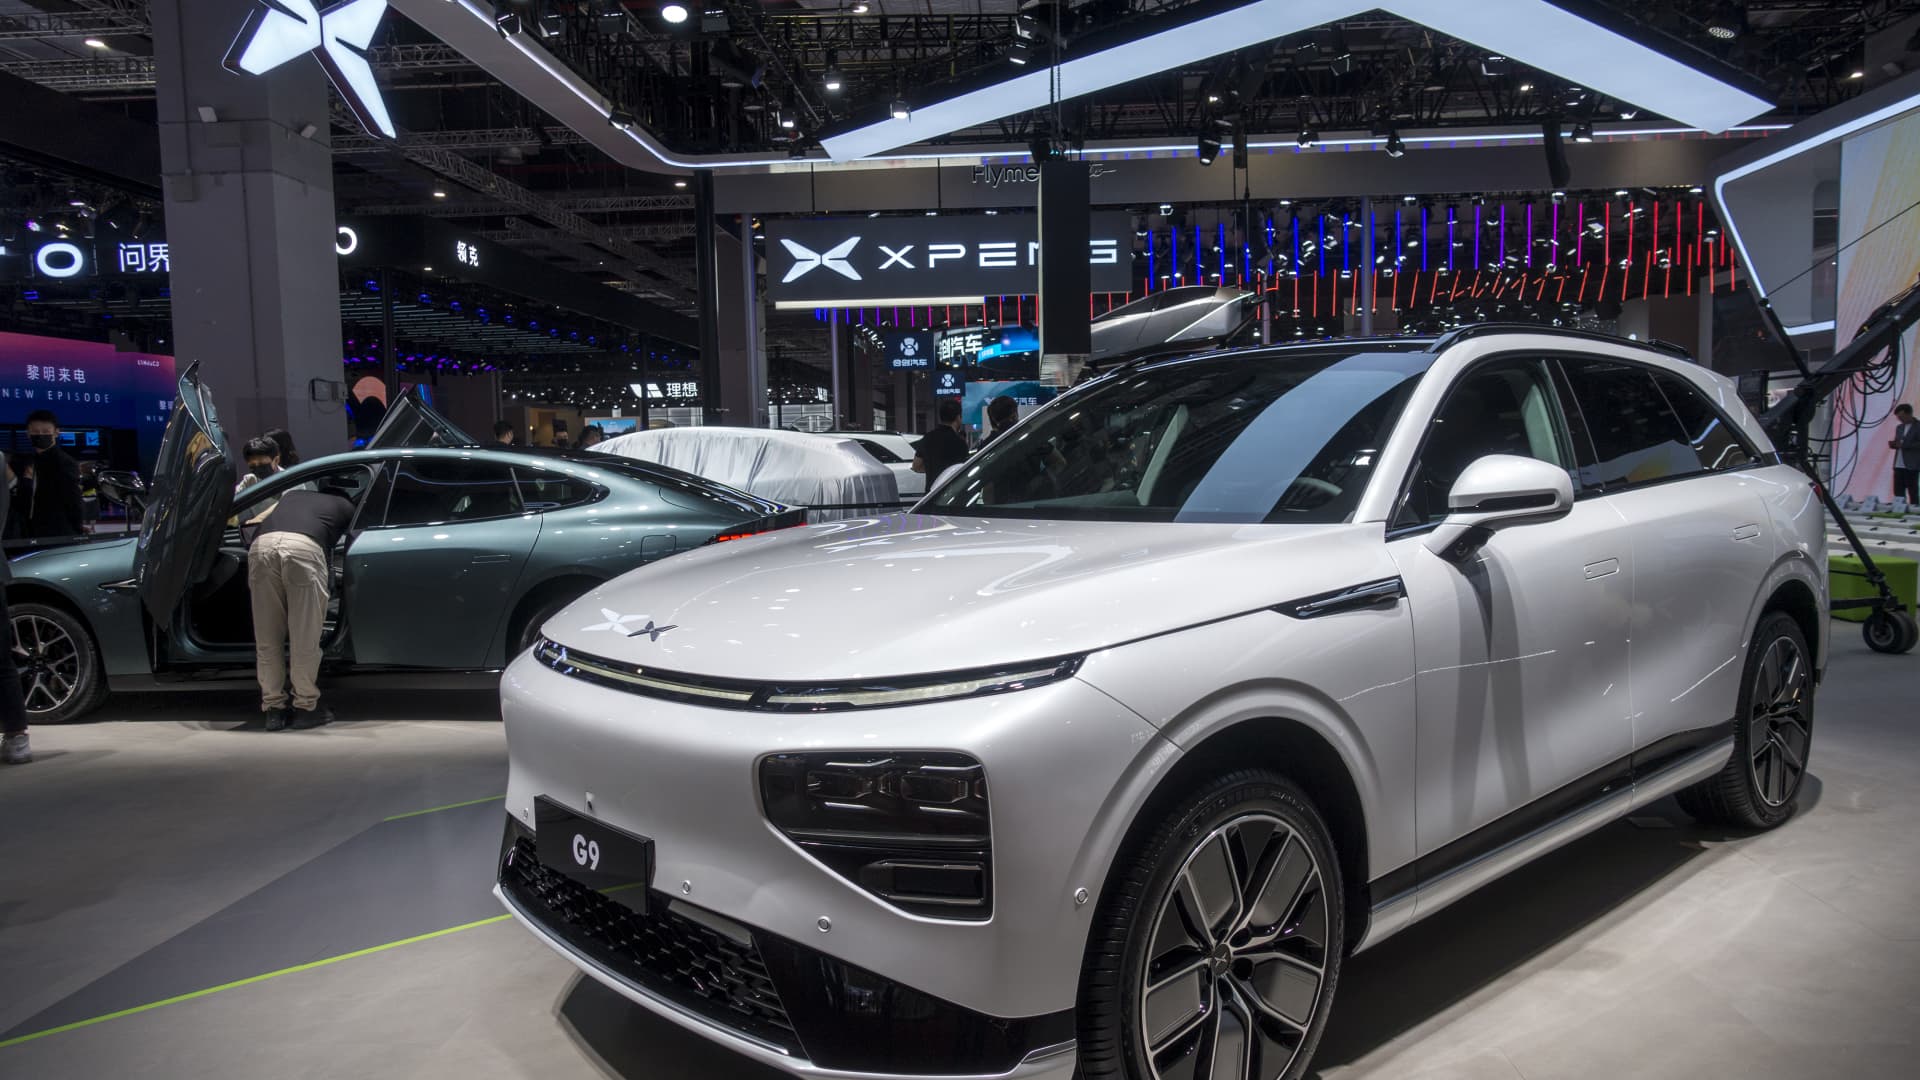 Xpeng CEO Issues Warning of Potential ‘Bloodbath’ in Electric Vehicle Industry